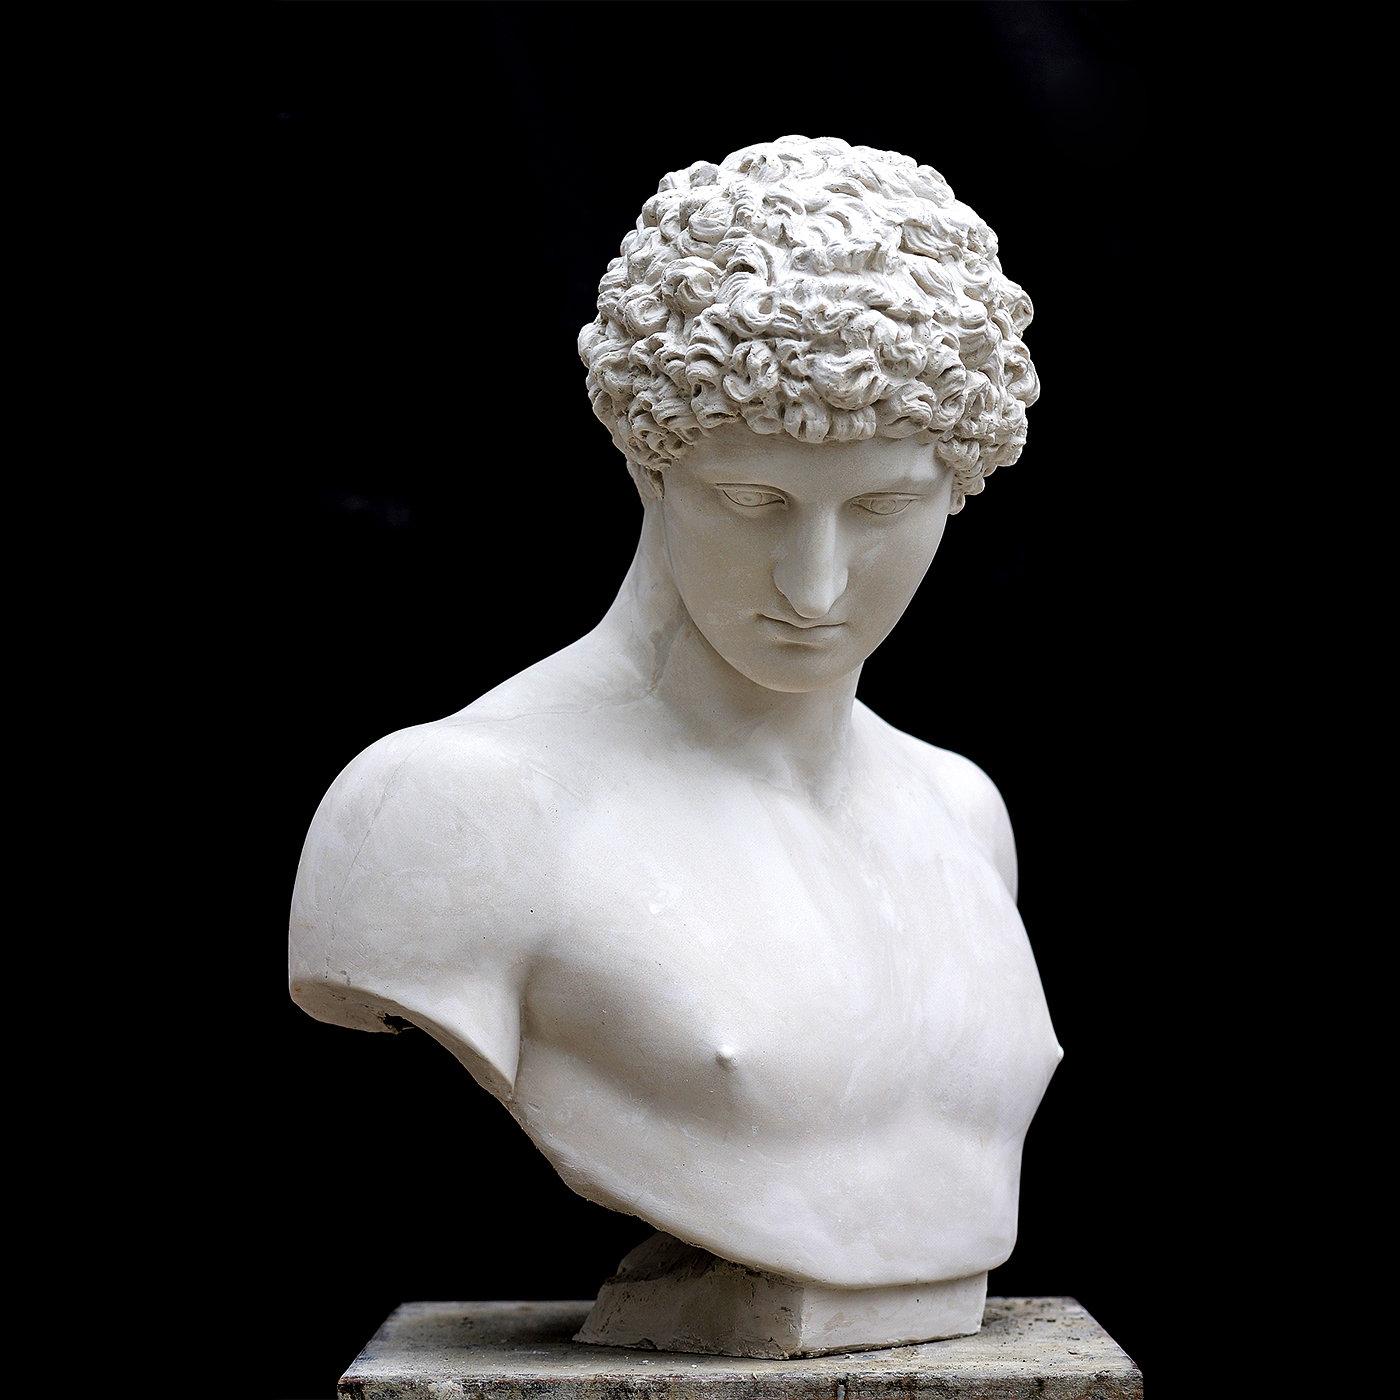 The elegant features of the young Antinous, a favorite of beloved Roman emperor Hadrian, are masterfully captured with exceptional richness in this plaster bust of the ancient Greek hero, a masterpiece created by the artisans of the Romanelli